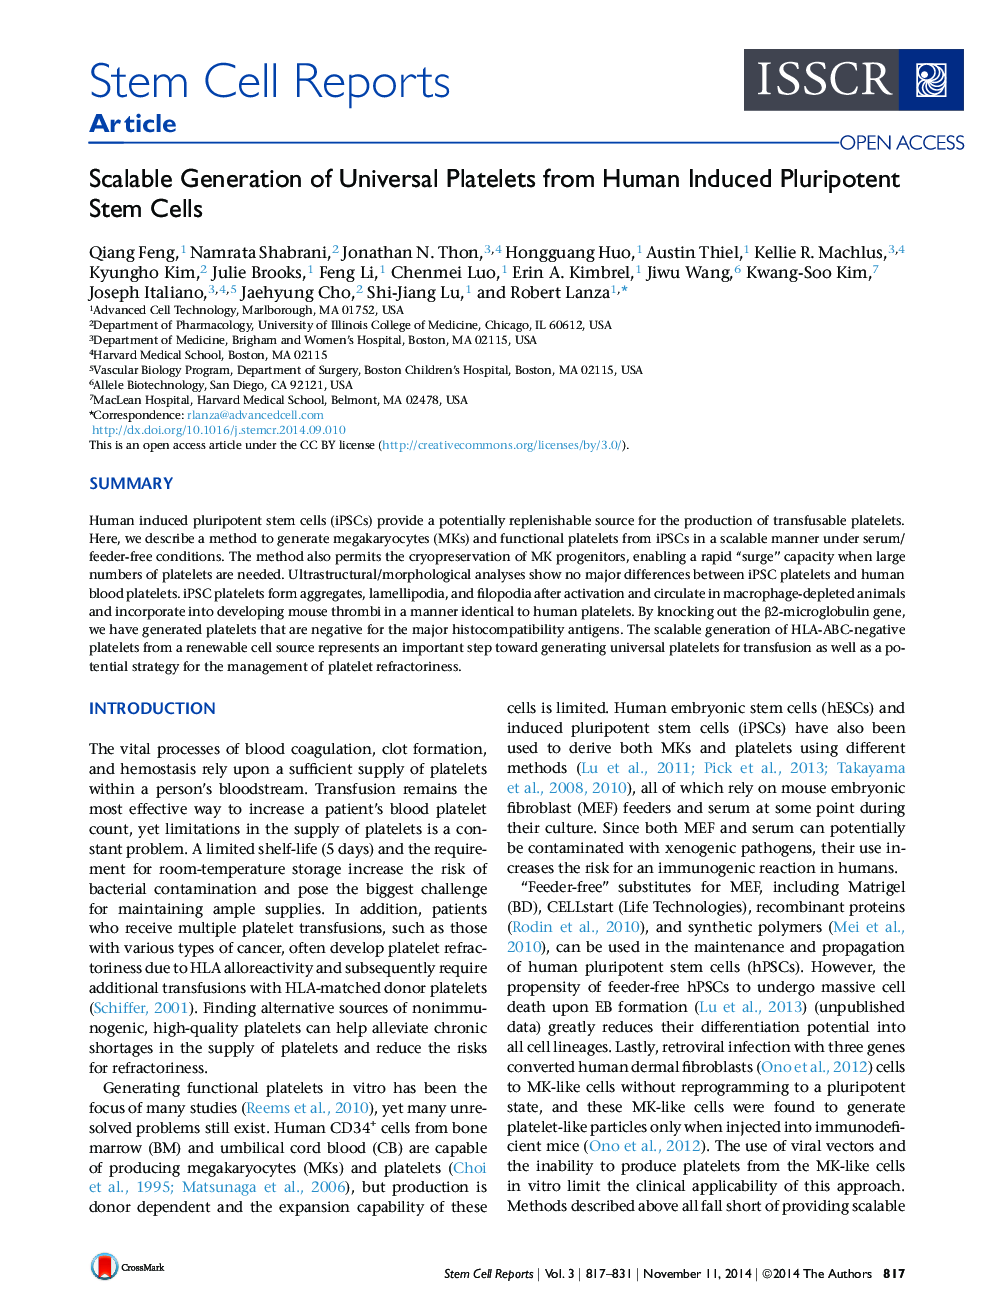 Scalable Generation of Universal Platelets from Human Induced Pluripotent Stem Cells 